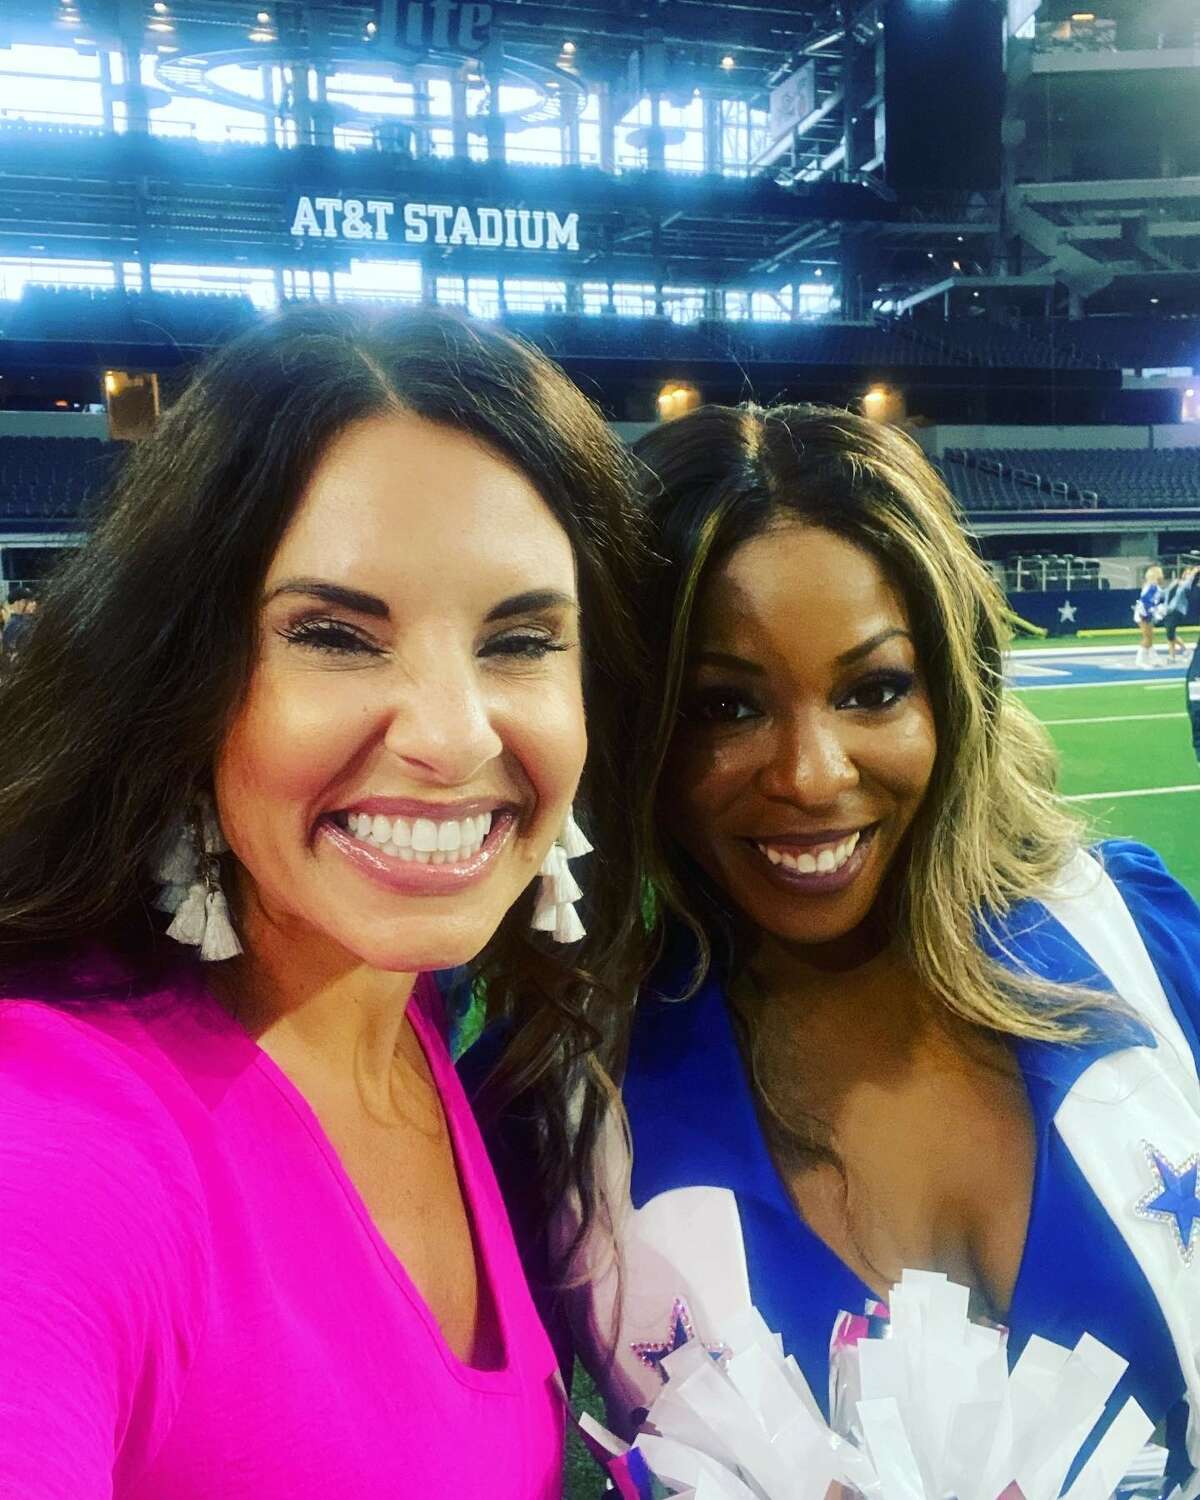 DK Dance Productions founder, owner and instructor Darci Kay Ward (left) of Jerseyville was a mentor for new Dallas Cowboys cheerleader Kayla Hayes.